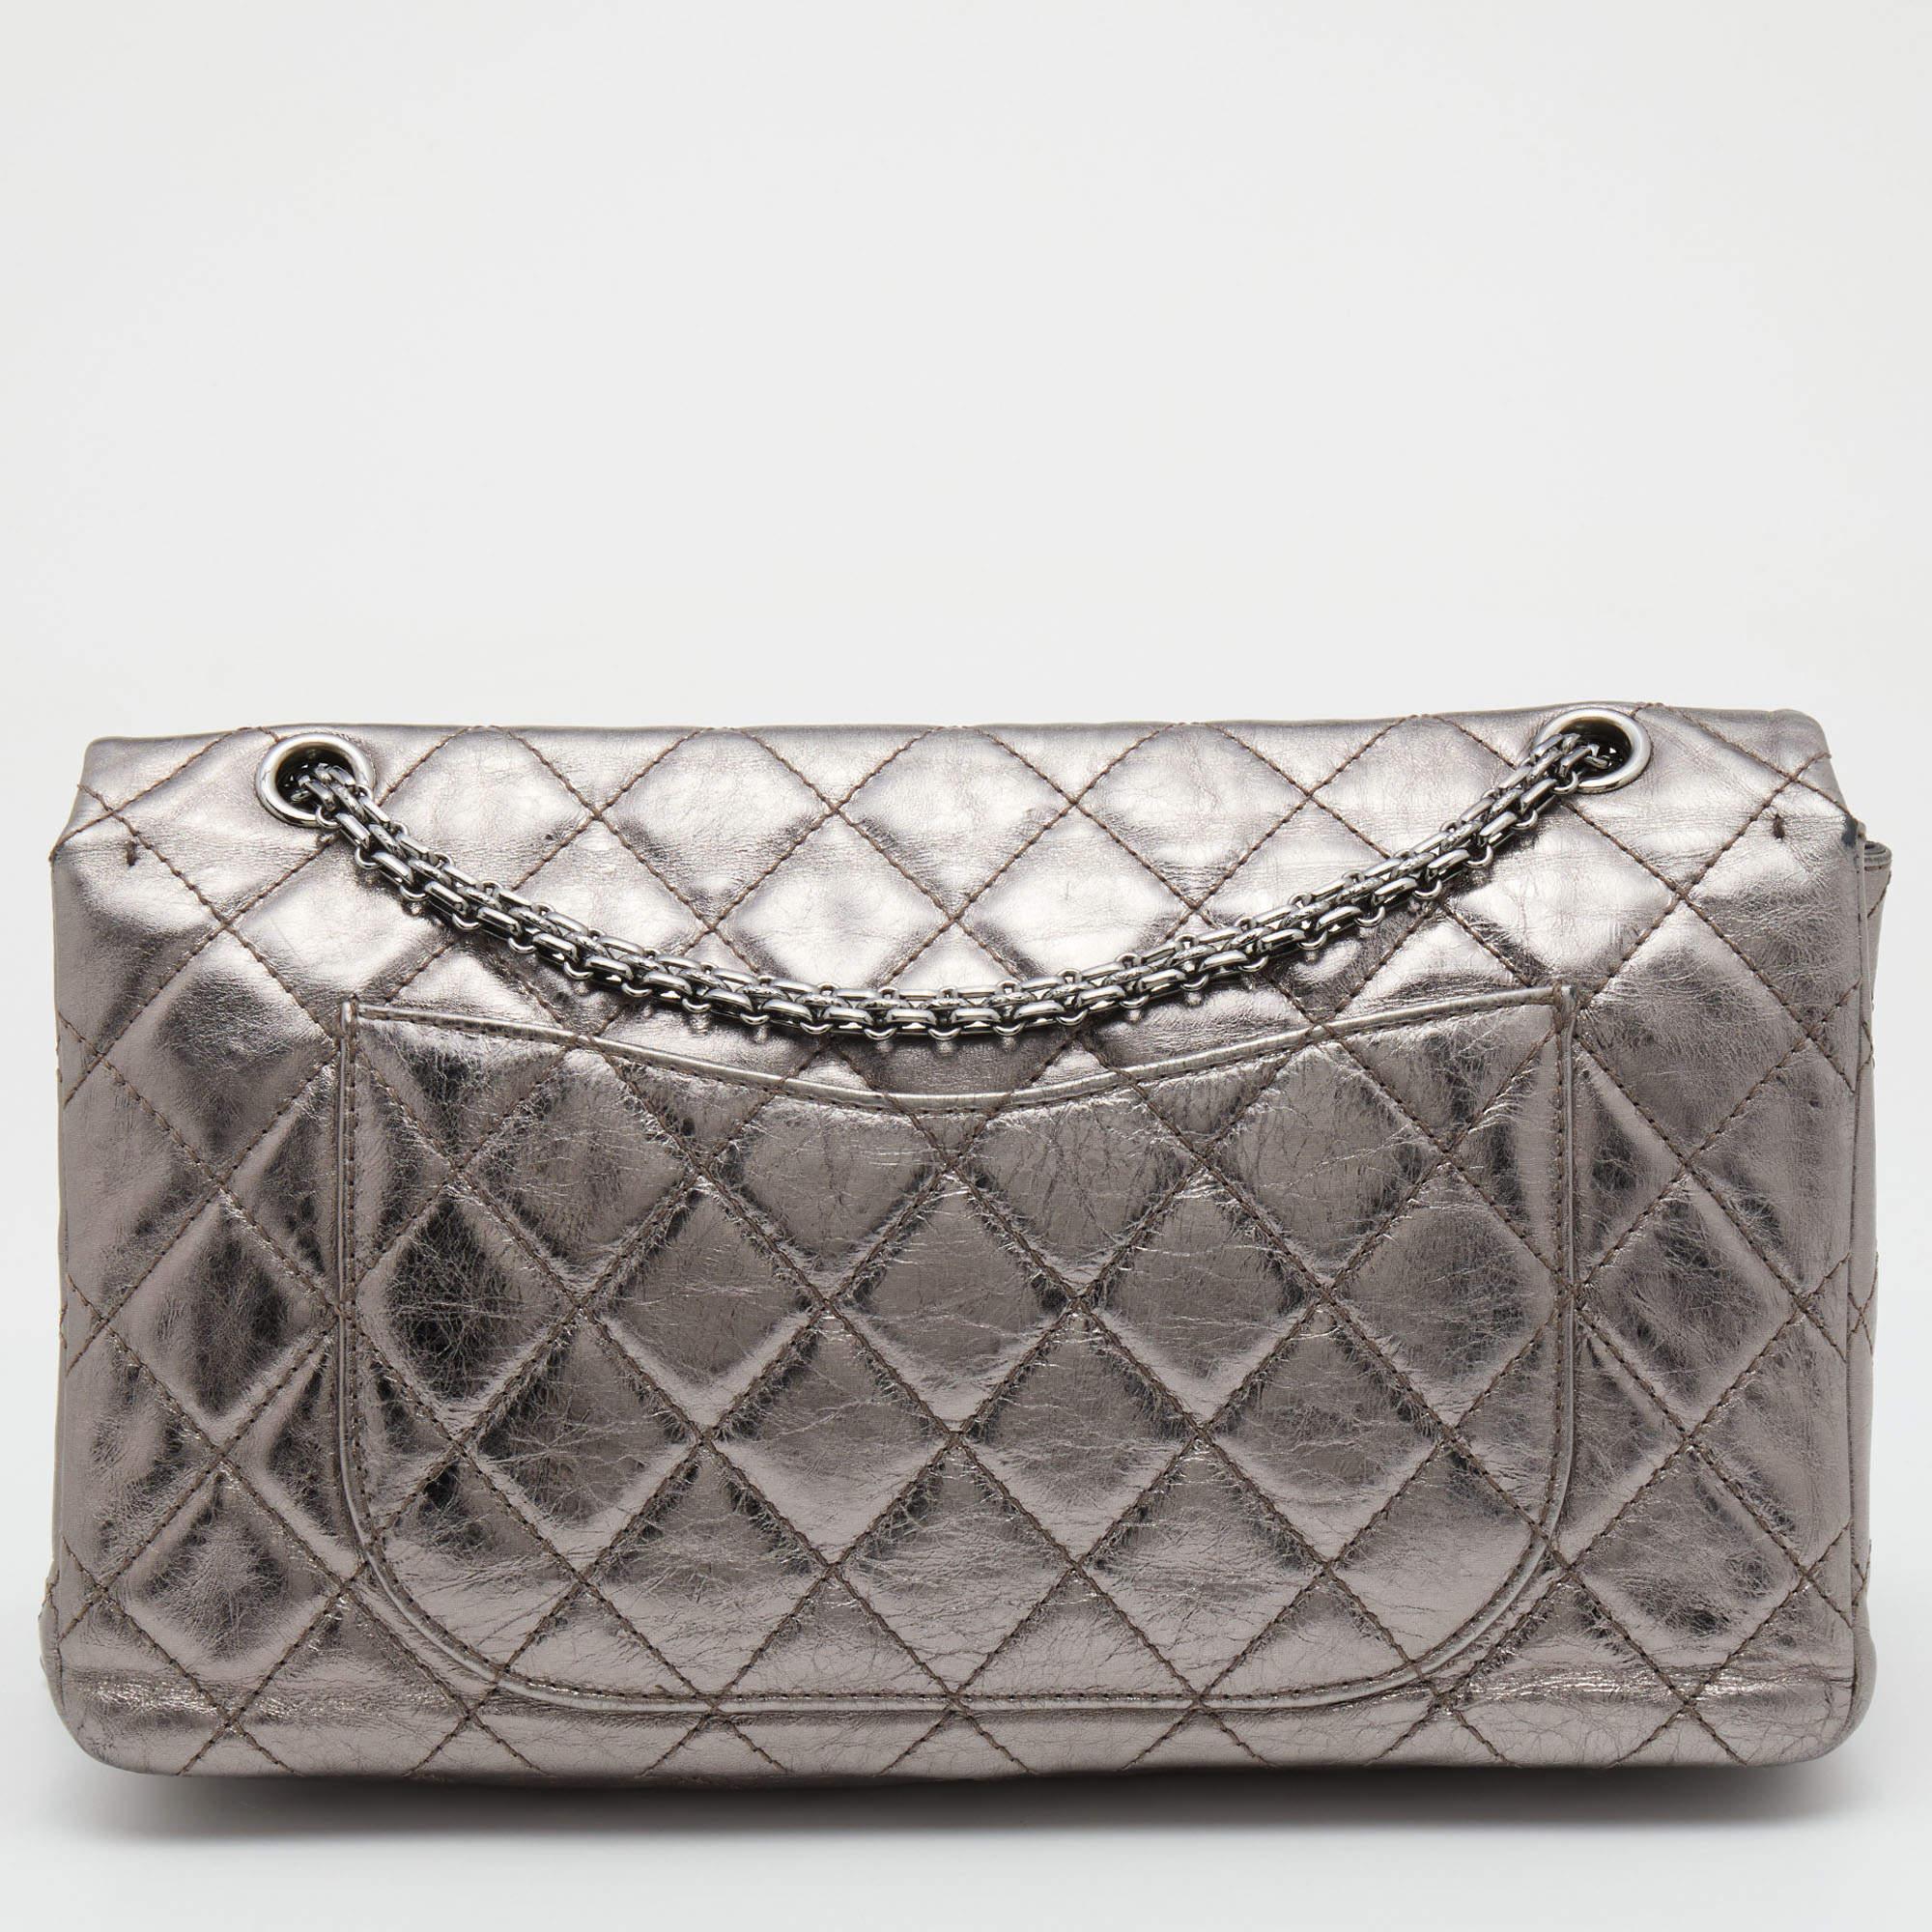 Chanel Metallic Quilted Aged Leather Reissue 2.55 Classic 227 Flap Bag 3